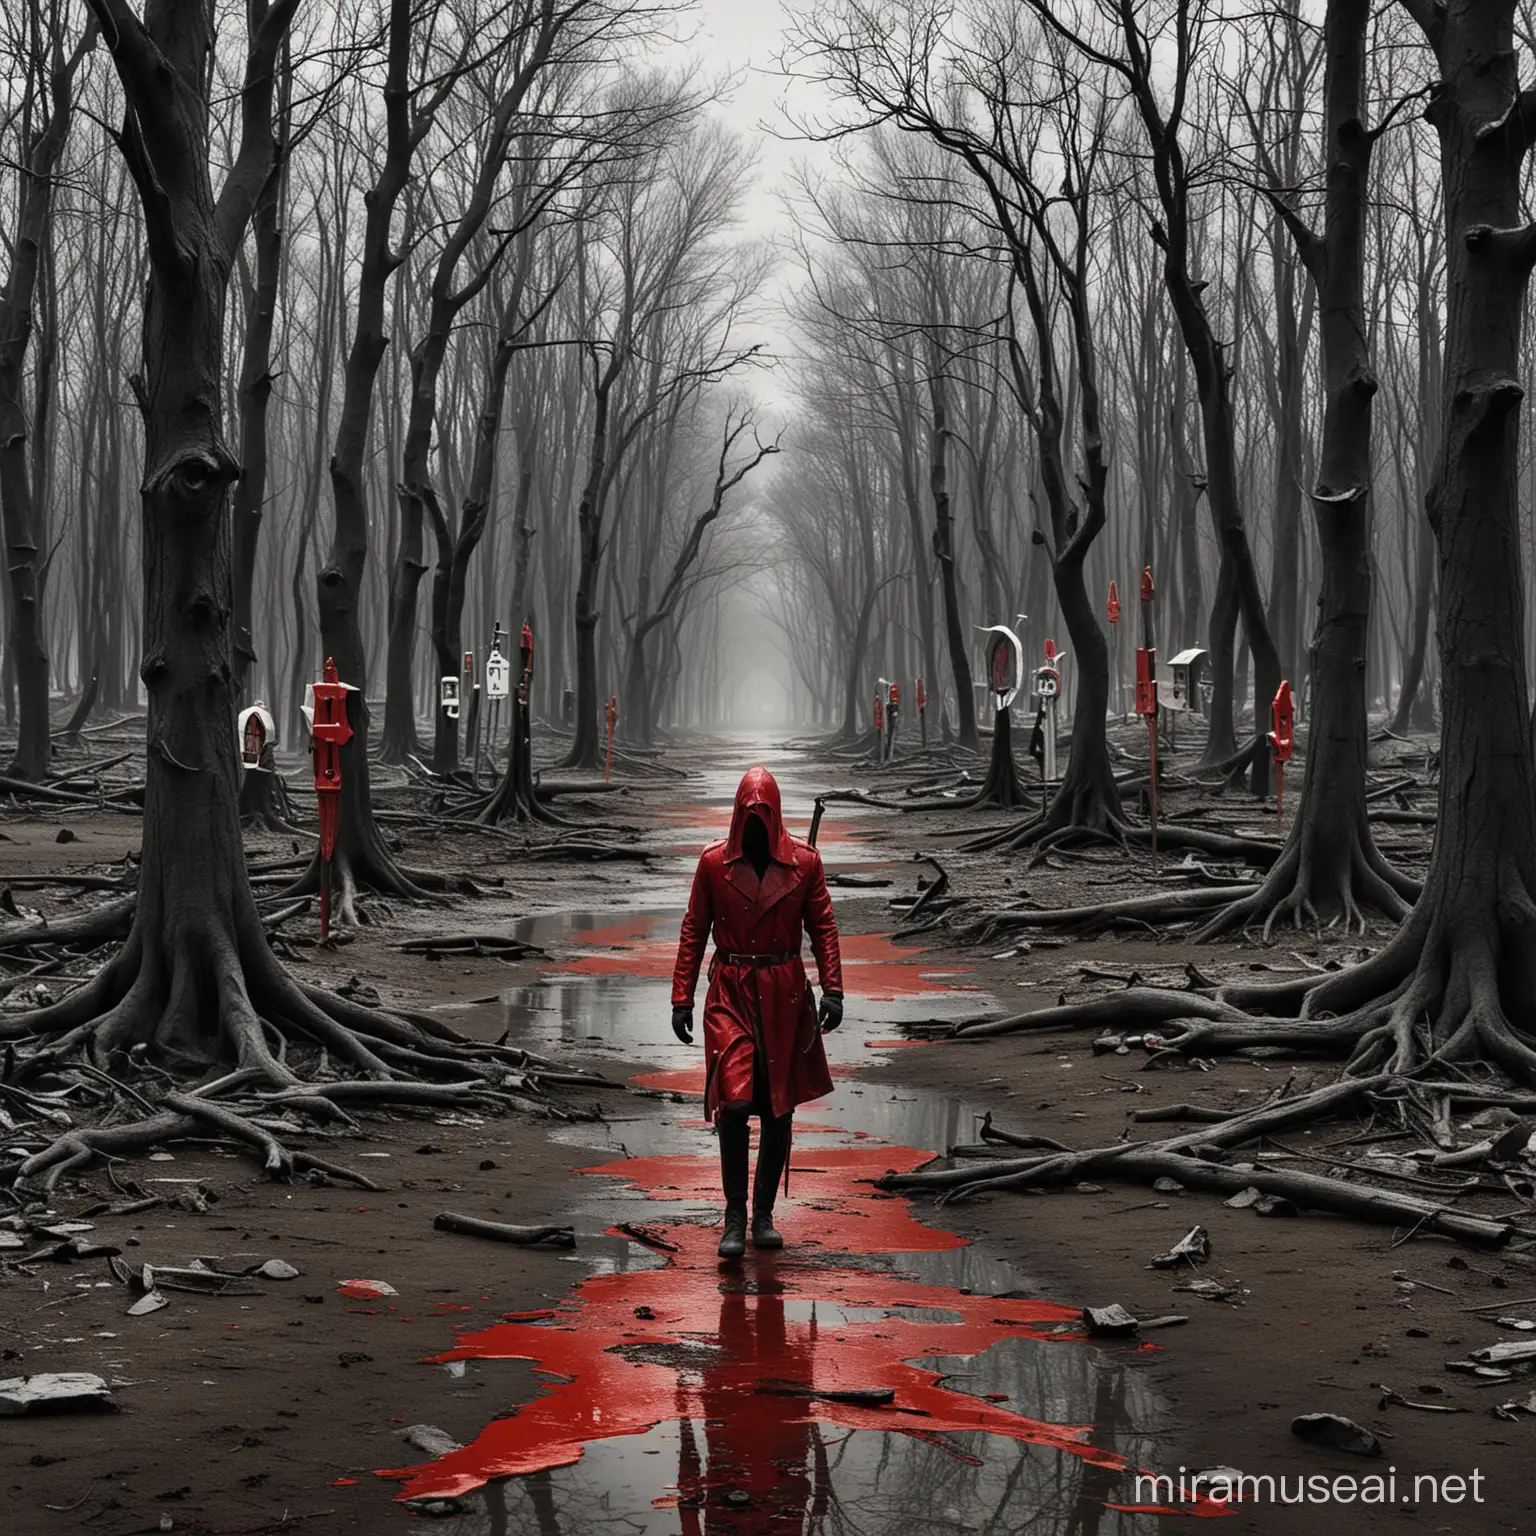 Surreal landscape: barren, distorted trees, melting clocks, distorted figures.
Shadowplay: a fight of a character against darker, monster versions.
Symbolic objects: masks, daggers, watches, emphasizing the themes mentioned in the text.

Red: represents passion, anger and pain.
Black: symbolizes darkness, mystery and depression.
White: symbolizes hope, purity and redemption